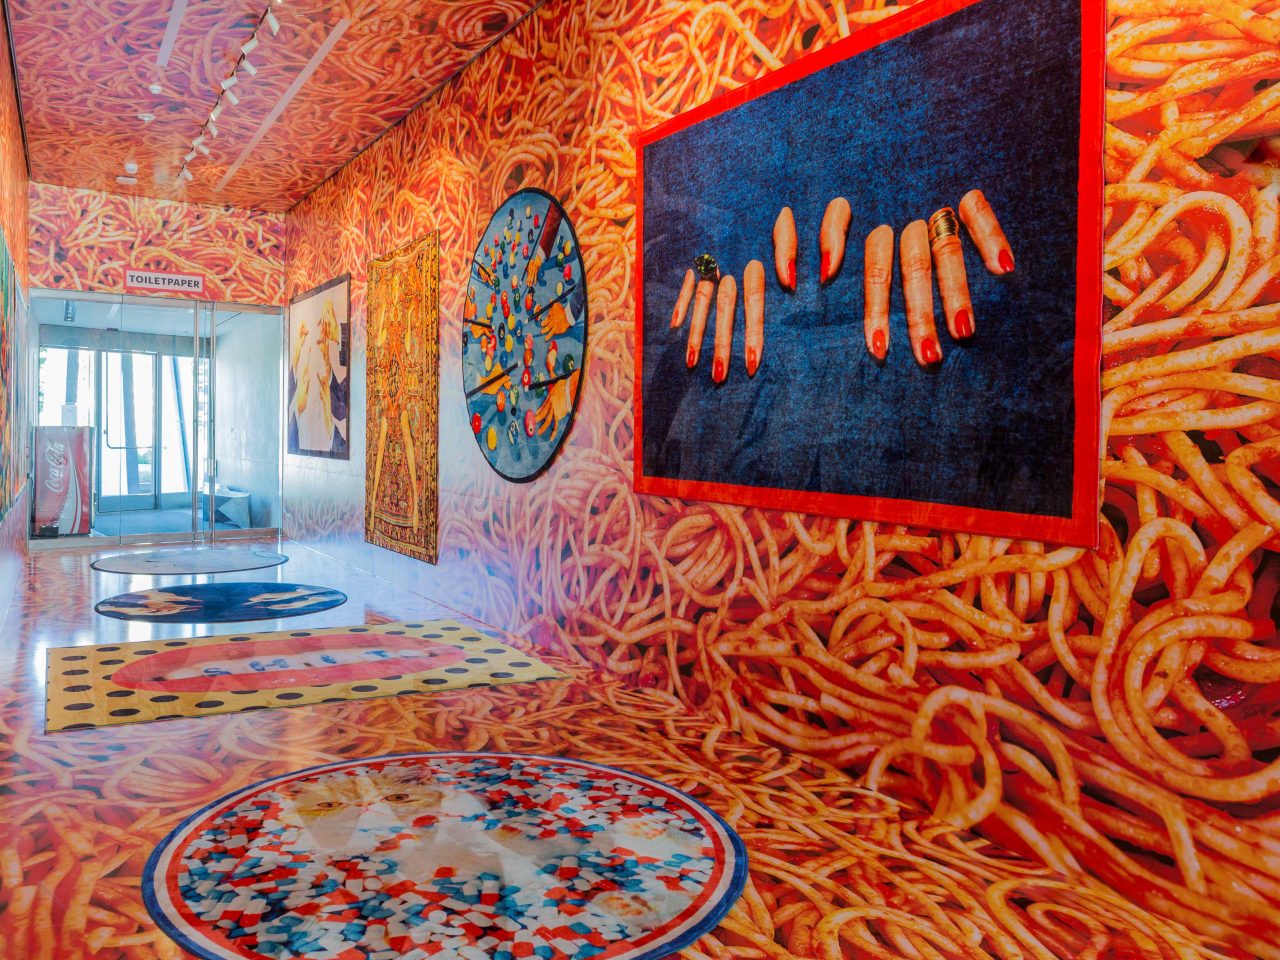 Hallway wrapped in detail image of spaghetti